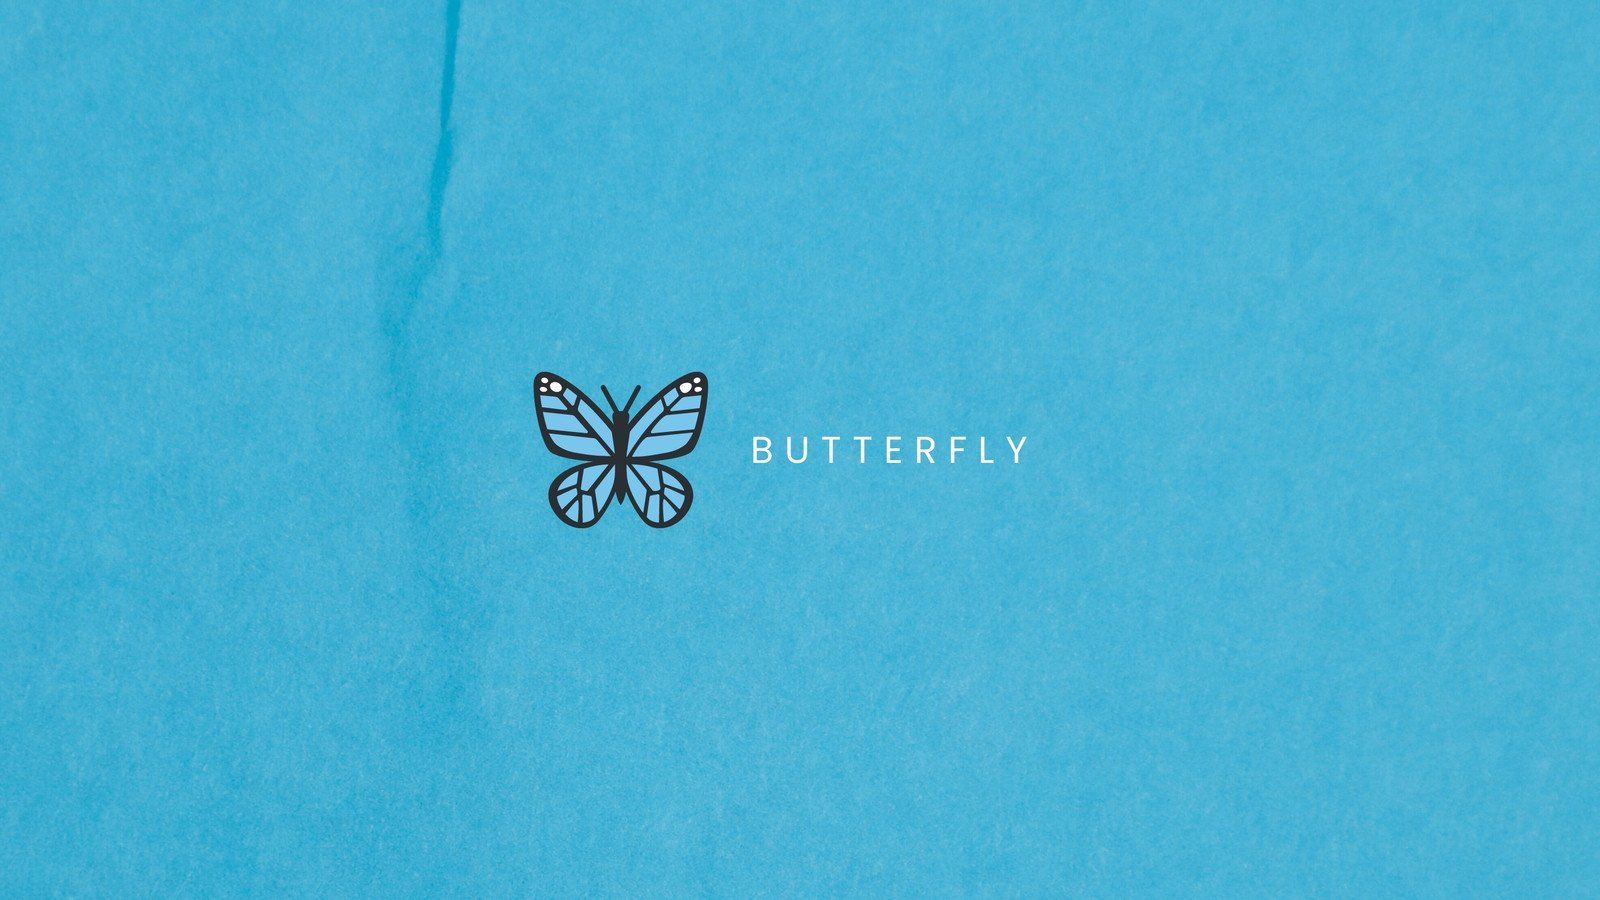 A blue background with a black butterfly logo and the word butterfly written in white - Blue, butterfly